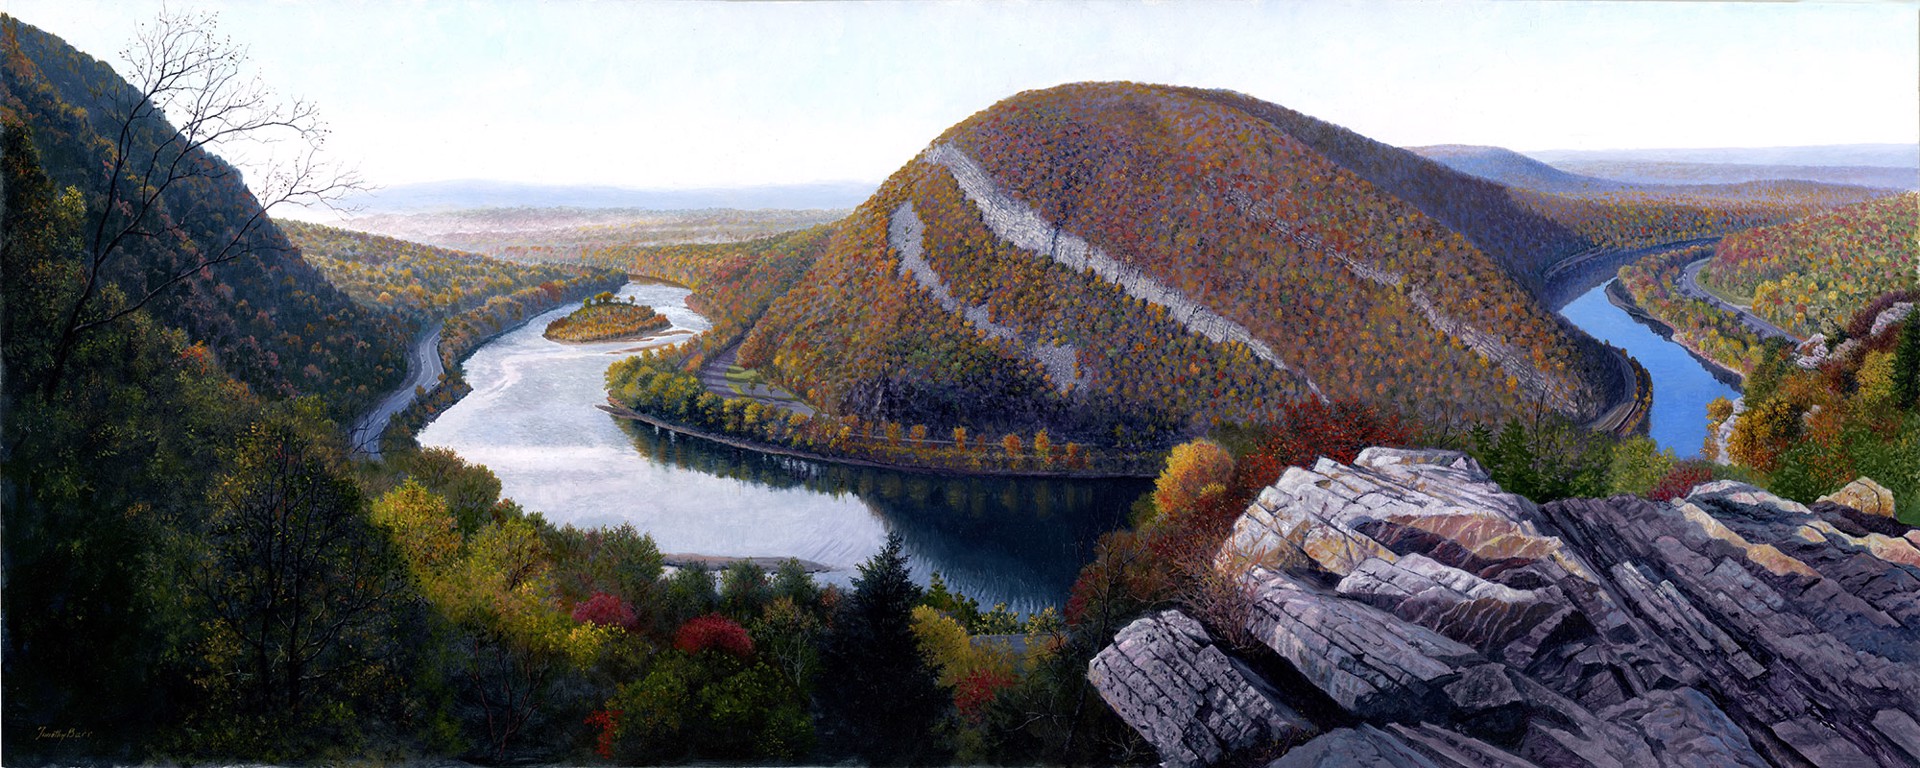 Mt. Tammany by Timothy Barr